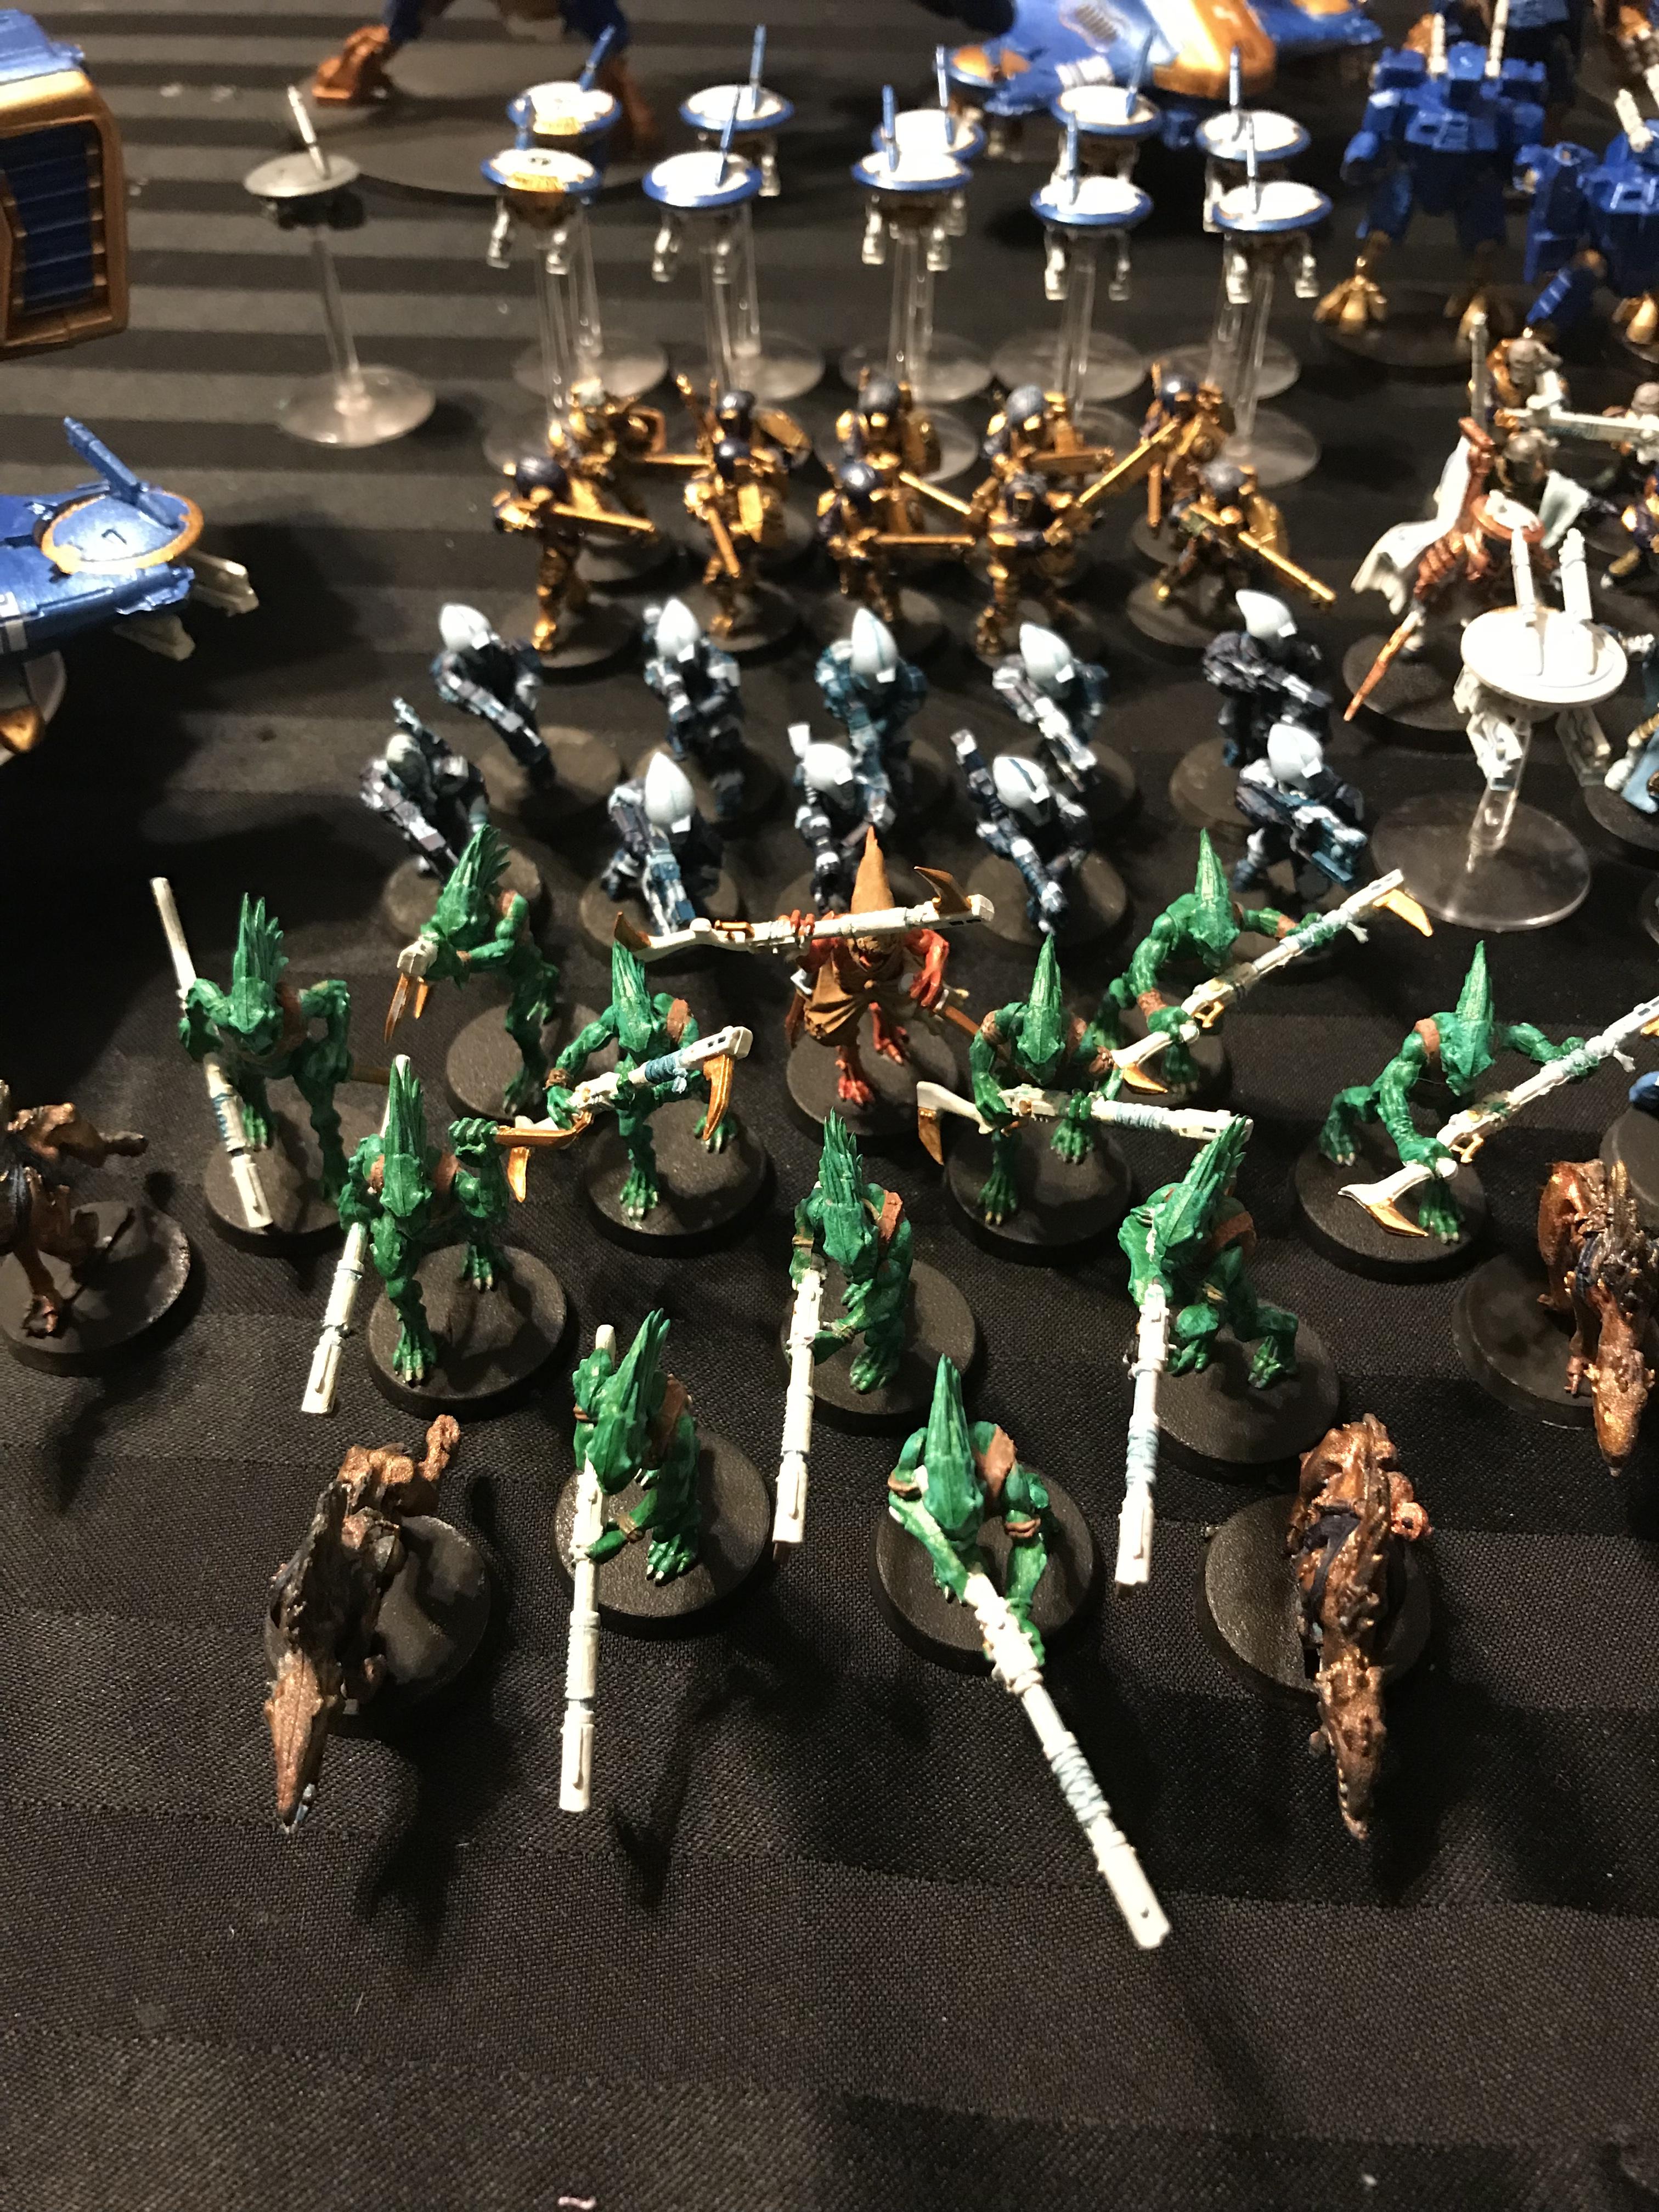 Section one - Kroot, Pathfinders, Gold Fire Squad